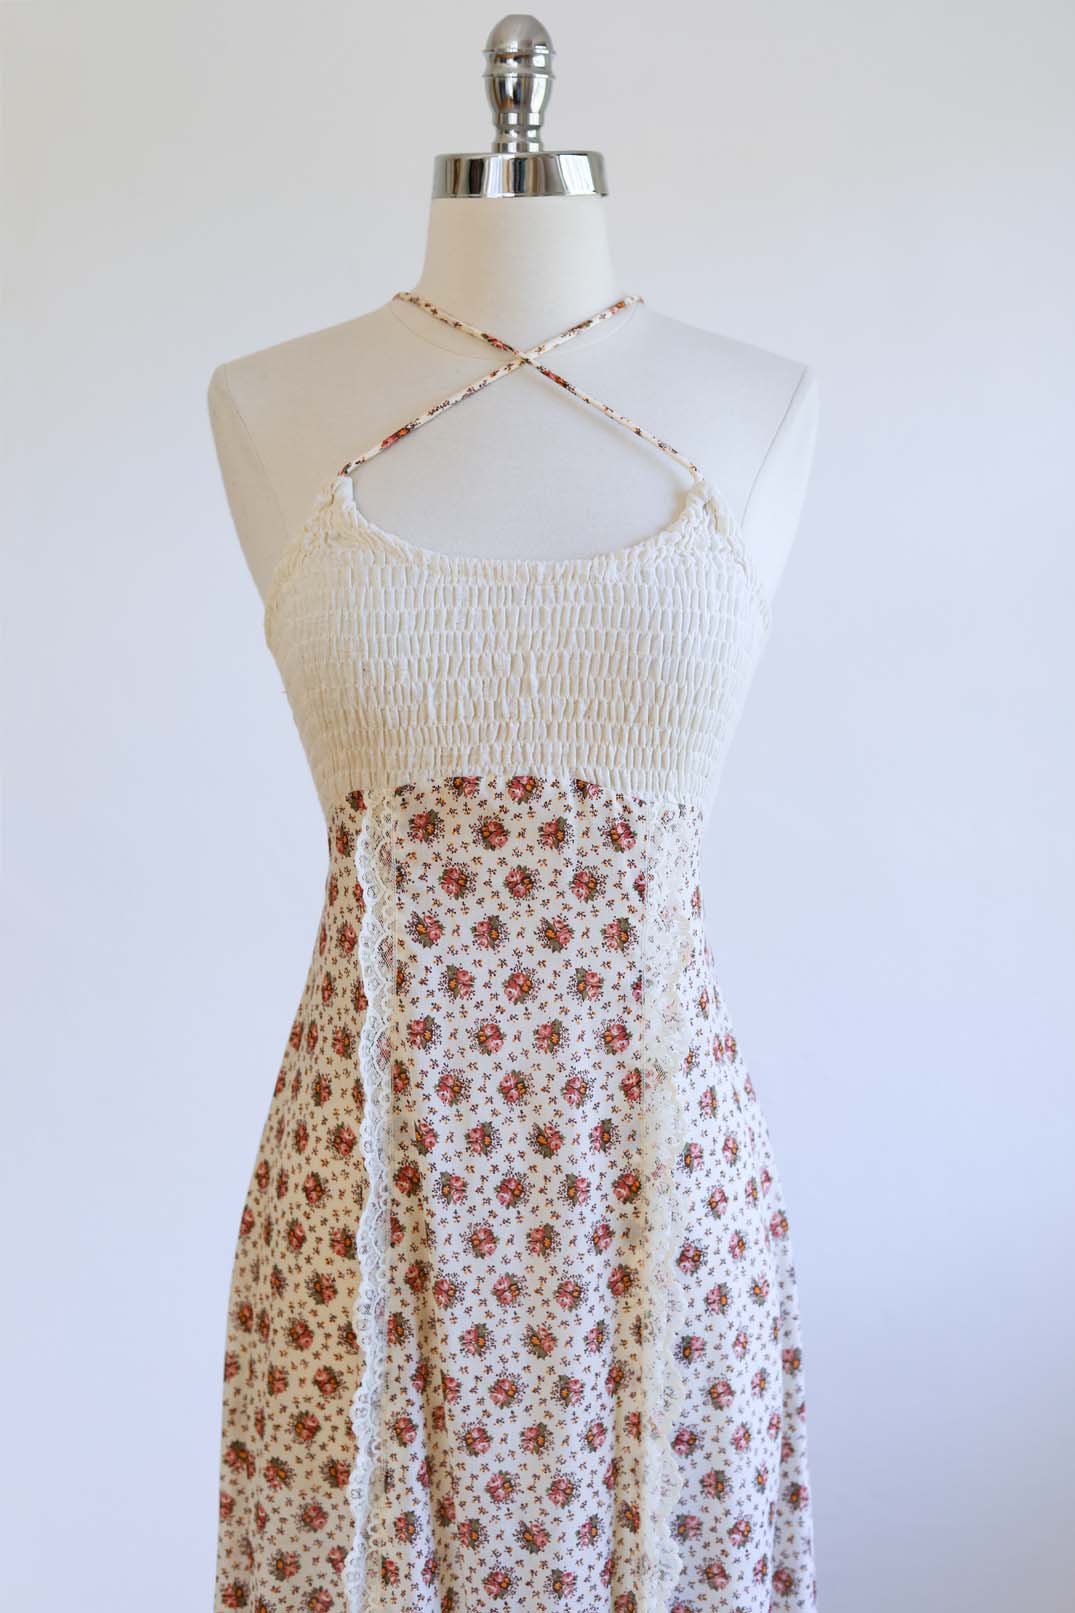 Vintage 1970s Dress - DARLING Jody T Cream Olive Pink Mustard Rose Print Calico Prairie Maxi Sundress w Convertible Straps Size XS to M